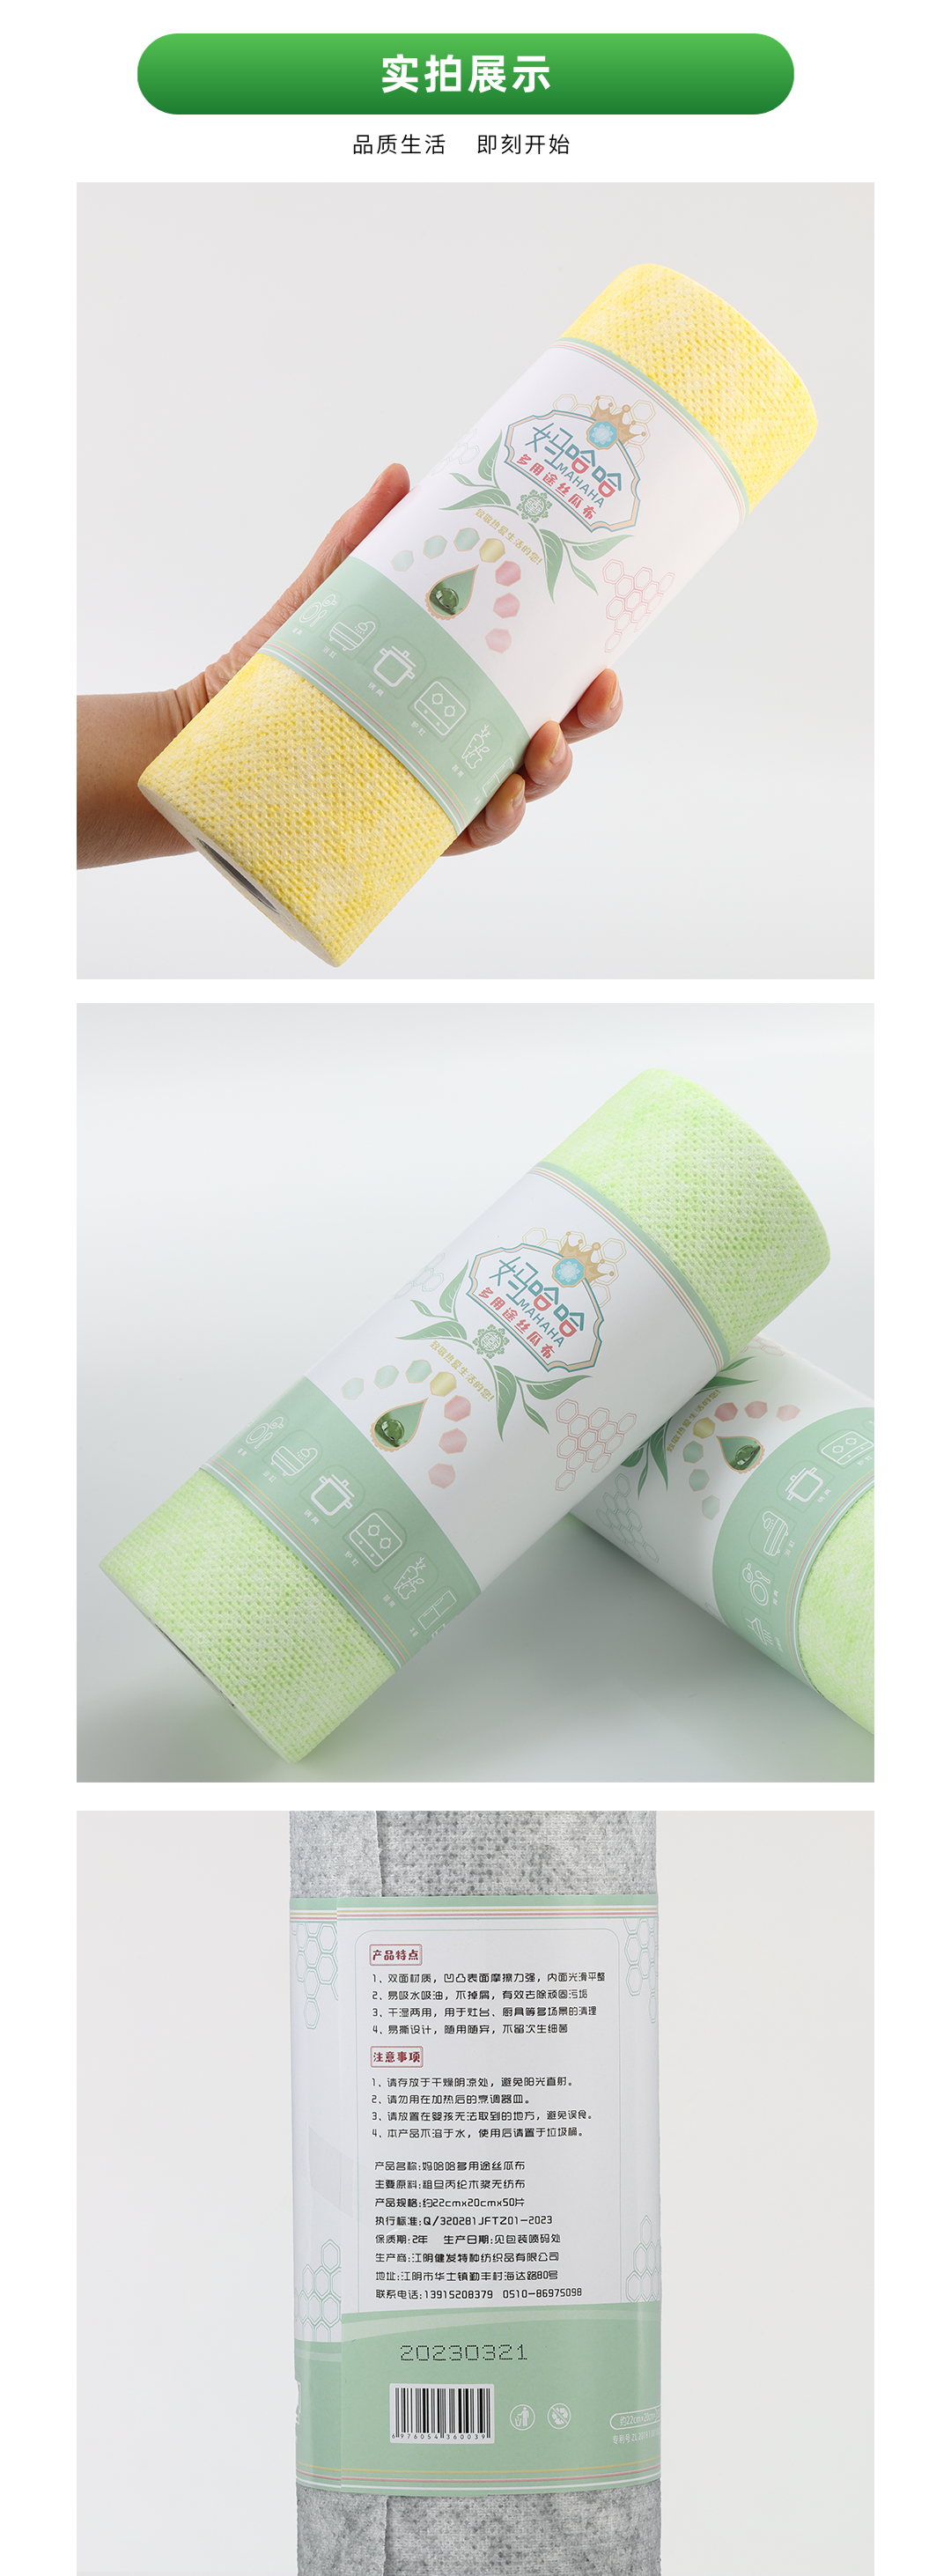 Multipurpose loofah cloth, disposable wet and dry household cleaning products, kitchen paper